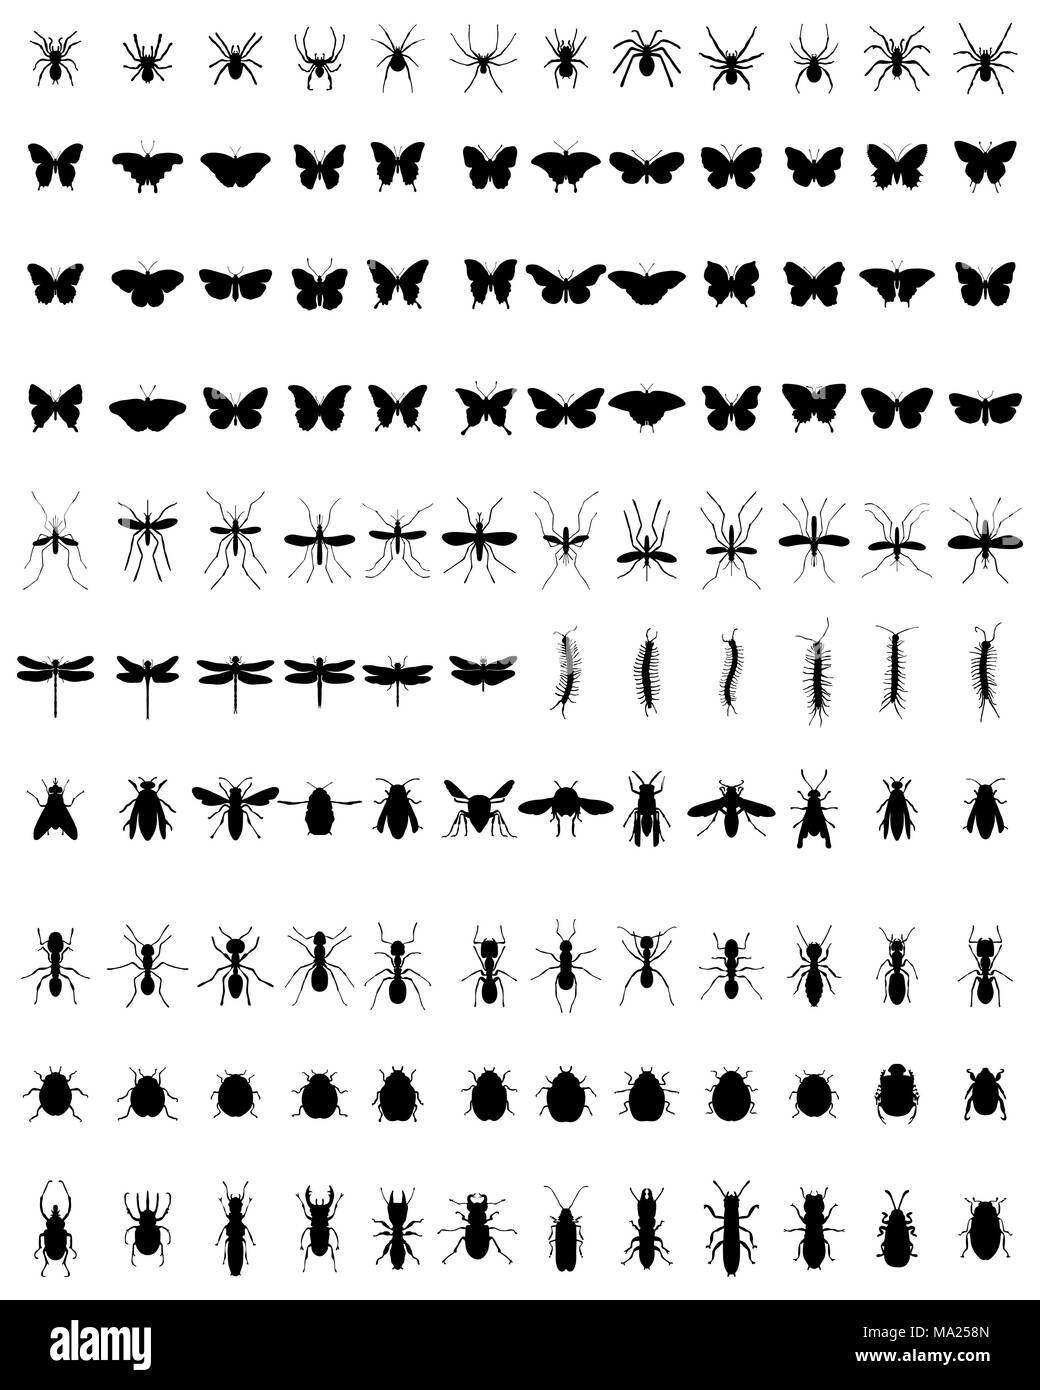 Black silhouettes of different insects on a white background Stock Photo